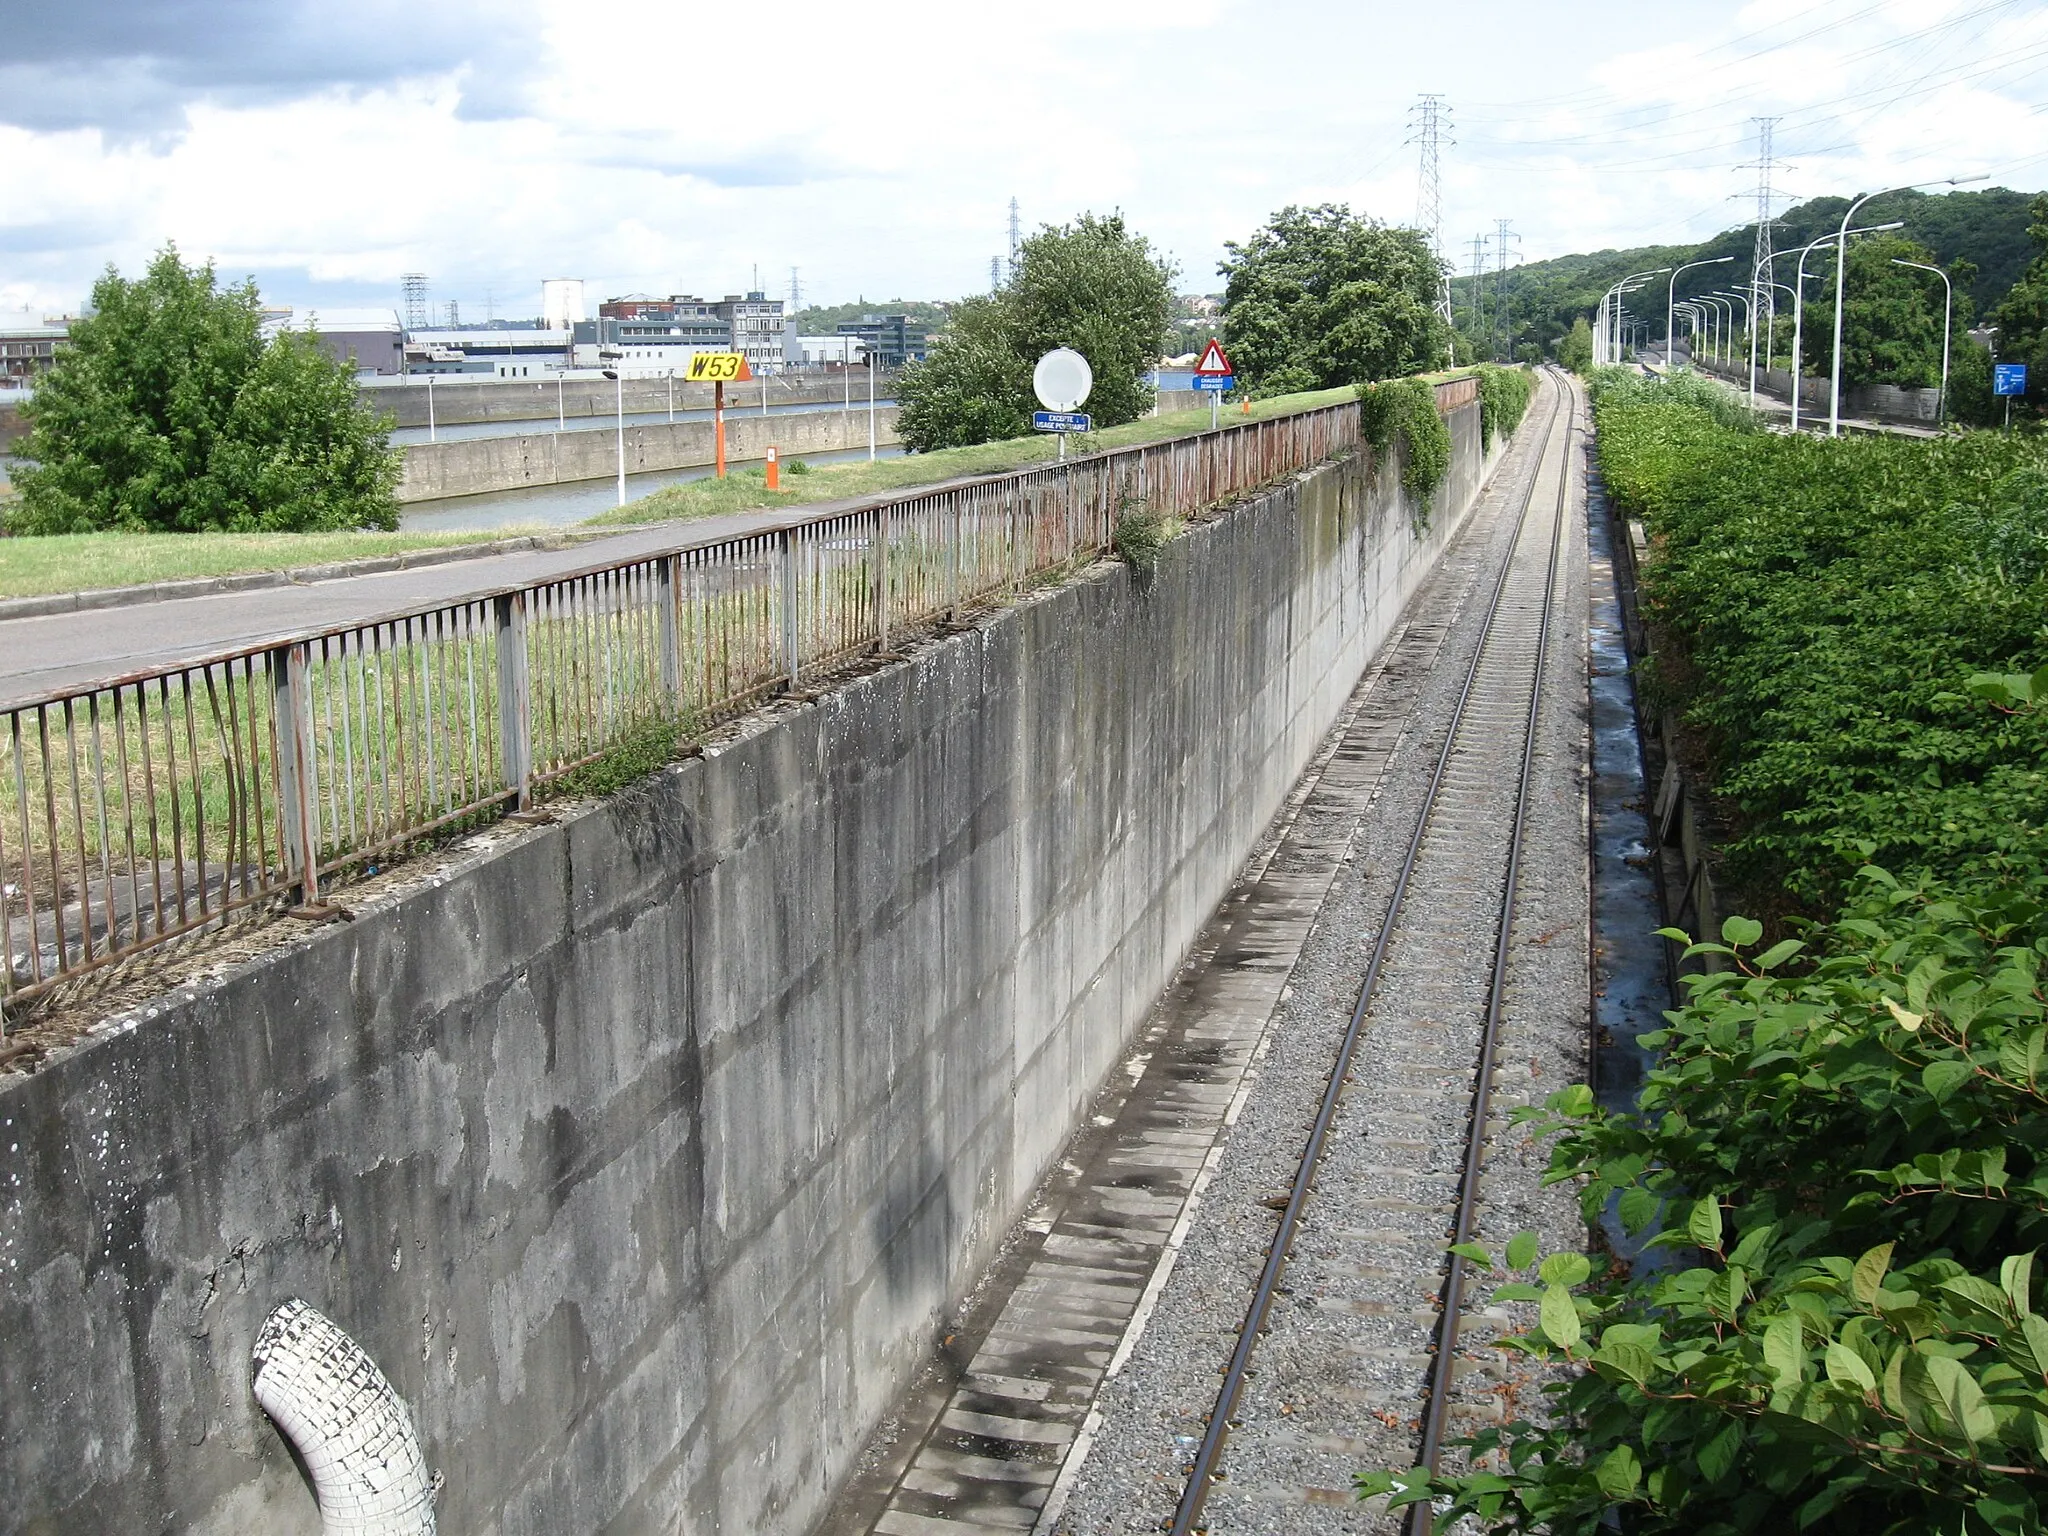 Photo showing: Industrial sliding line 285 close to the "Meuse" river. Taken close to the bridge over the Meuse river by Flémalle Haute.